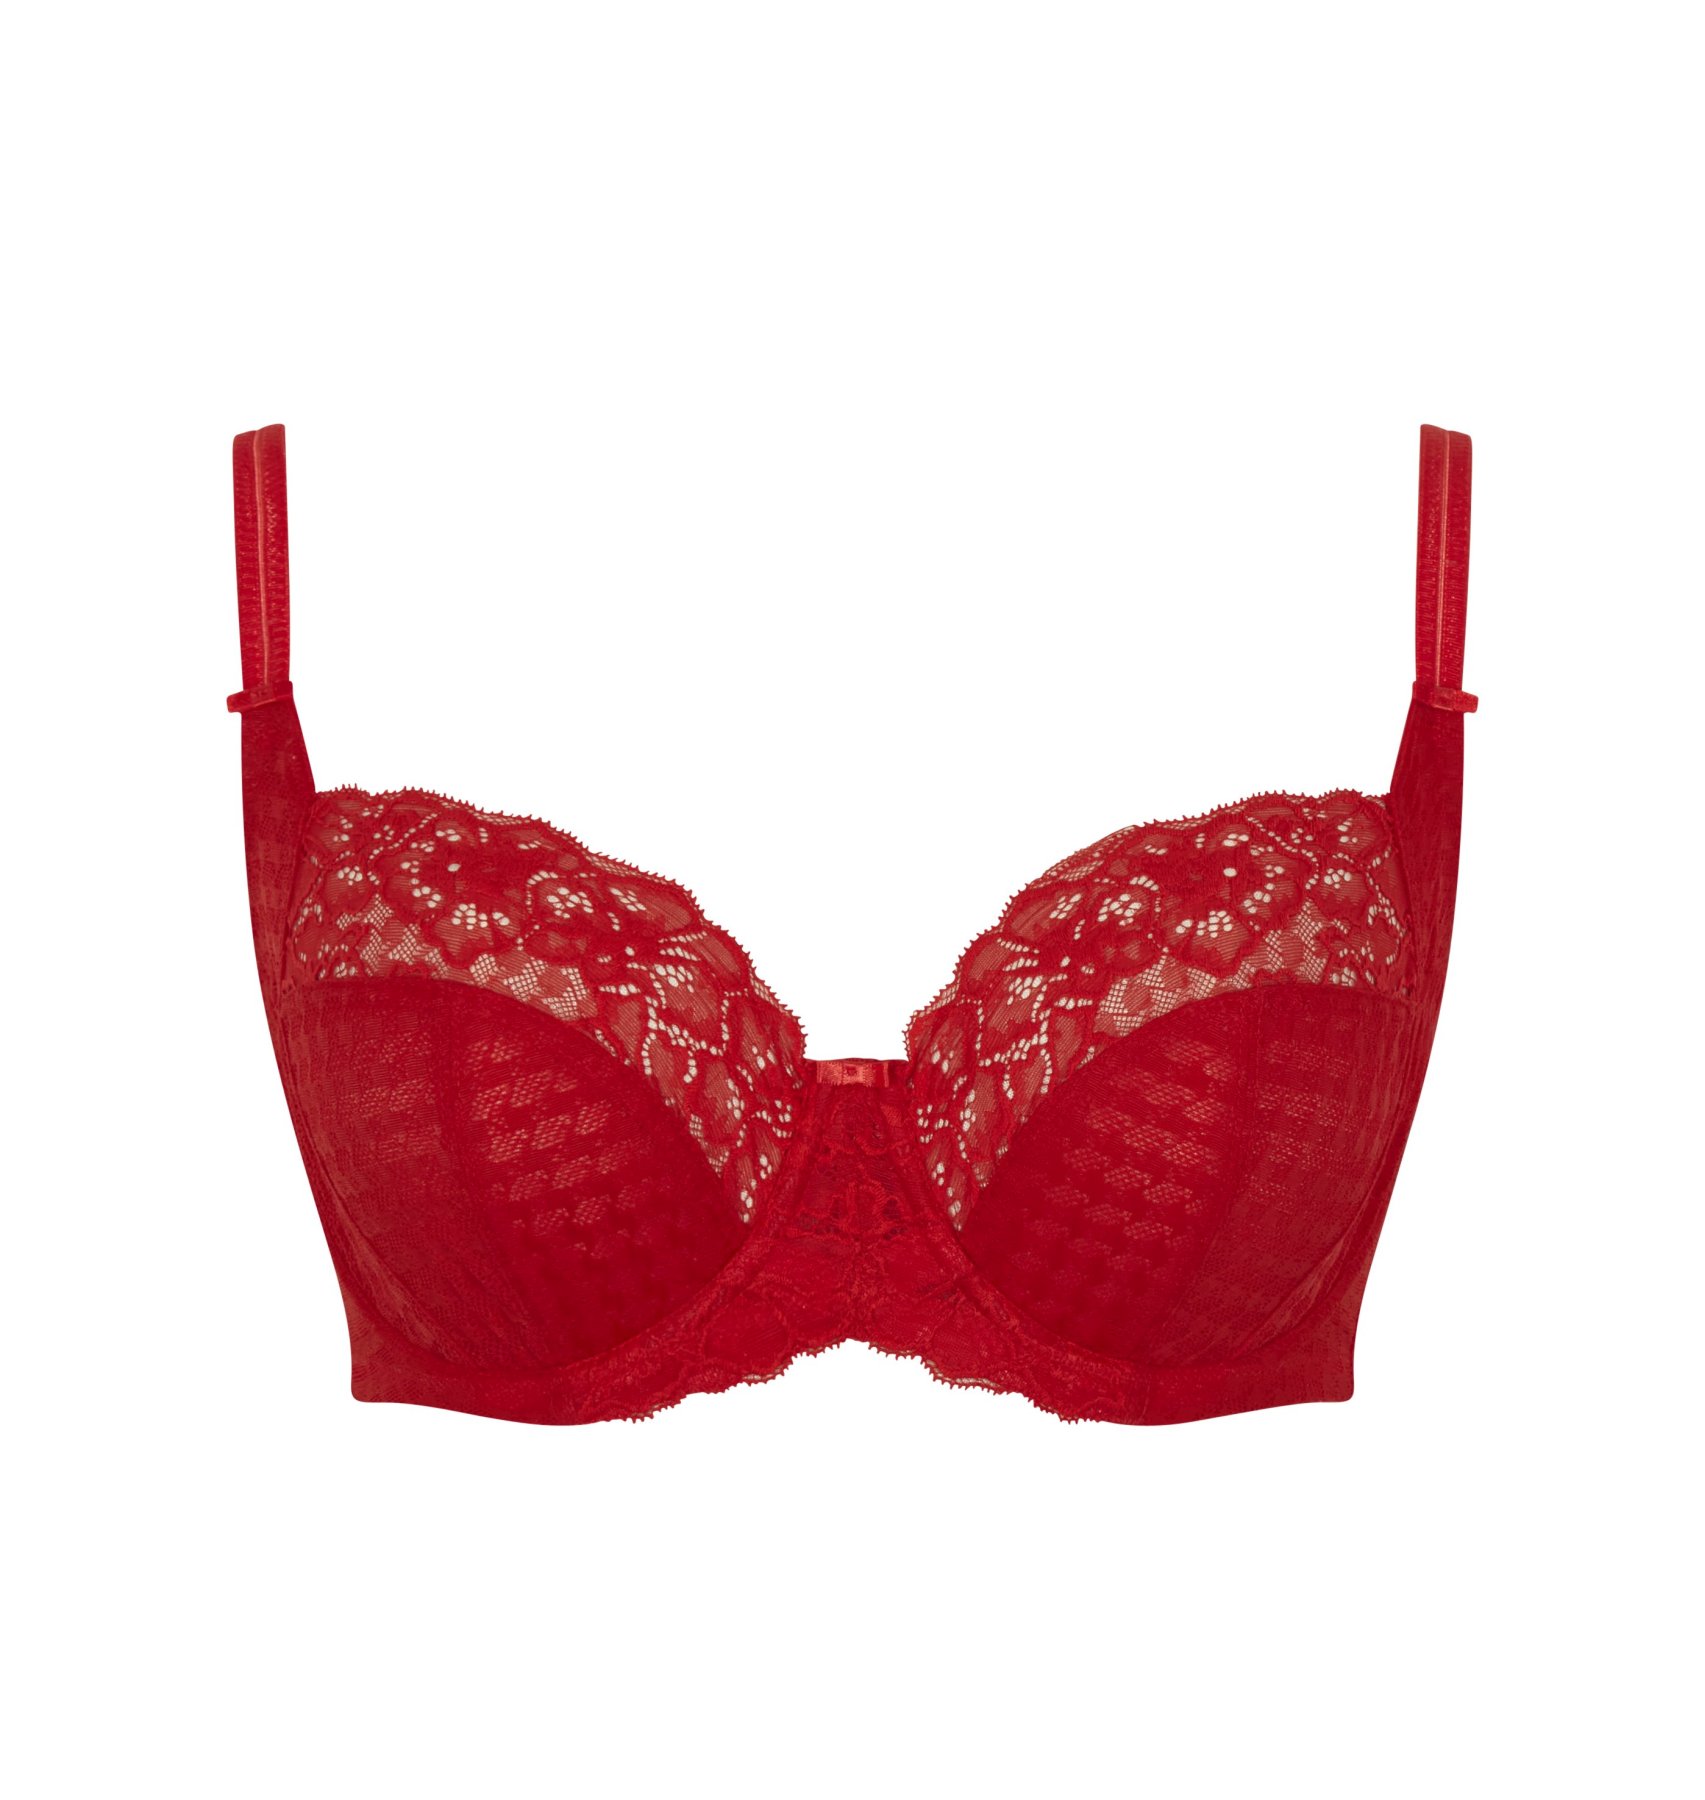 Envy Poppy Red Lace Soft Cup Balconnet Bra